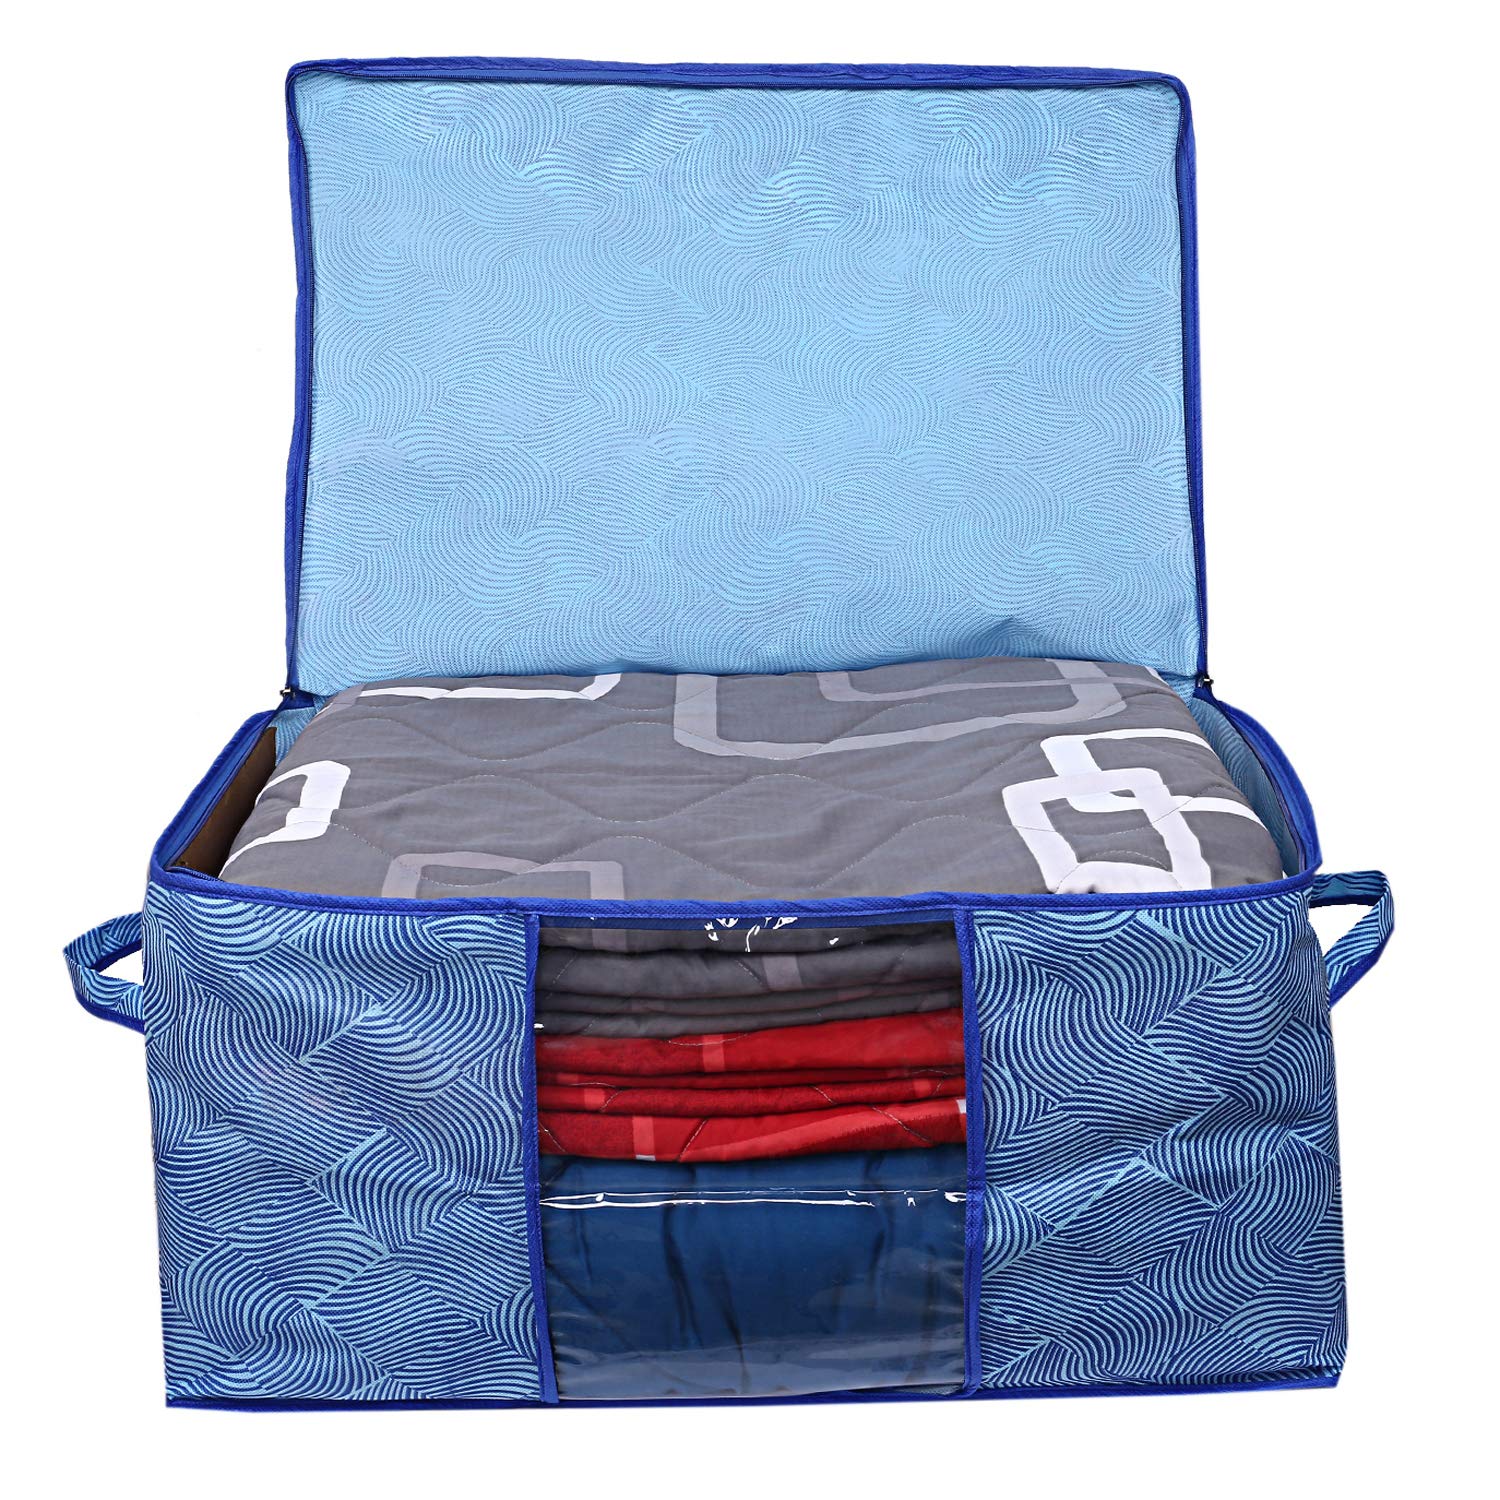 Kuber Industries Leheriya Design Non Woven Underbed Storage Bag|Large Storage Organiser|Blanket Cover with Transparent Window|Size 65 x 47 x 34 CM|Pack of 4 ( Blue)